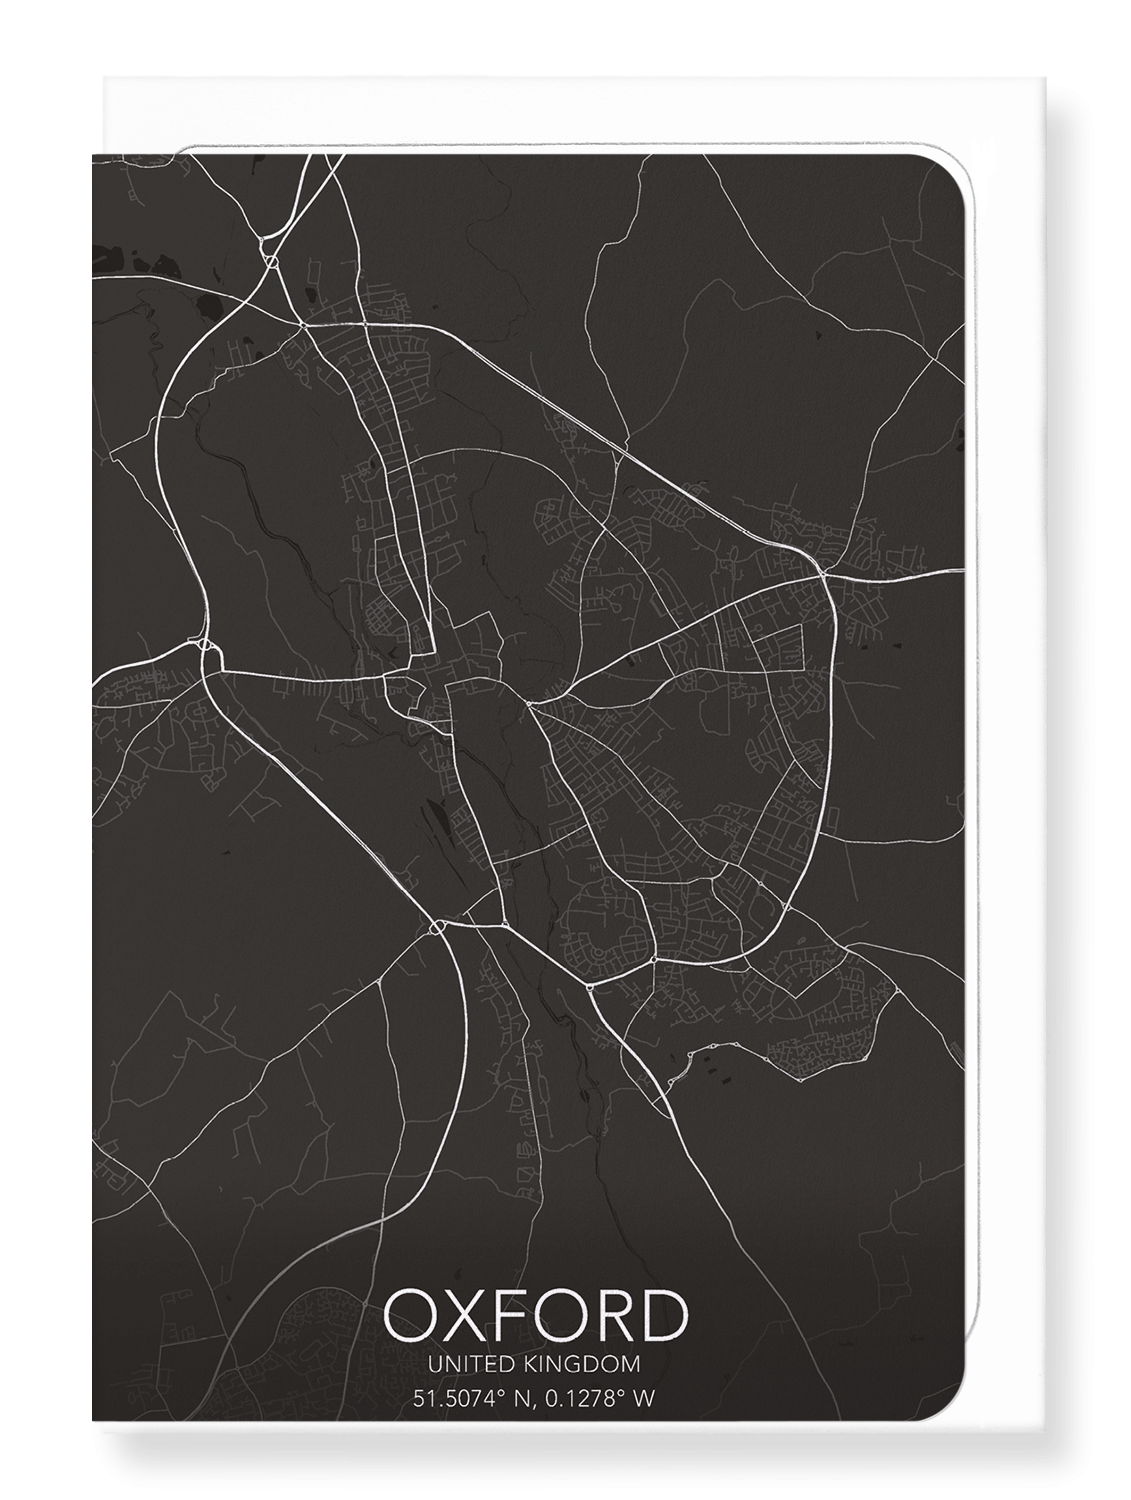 OXFORD FULL MAP: 8xCards